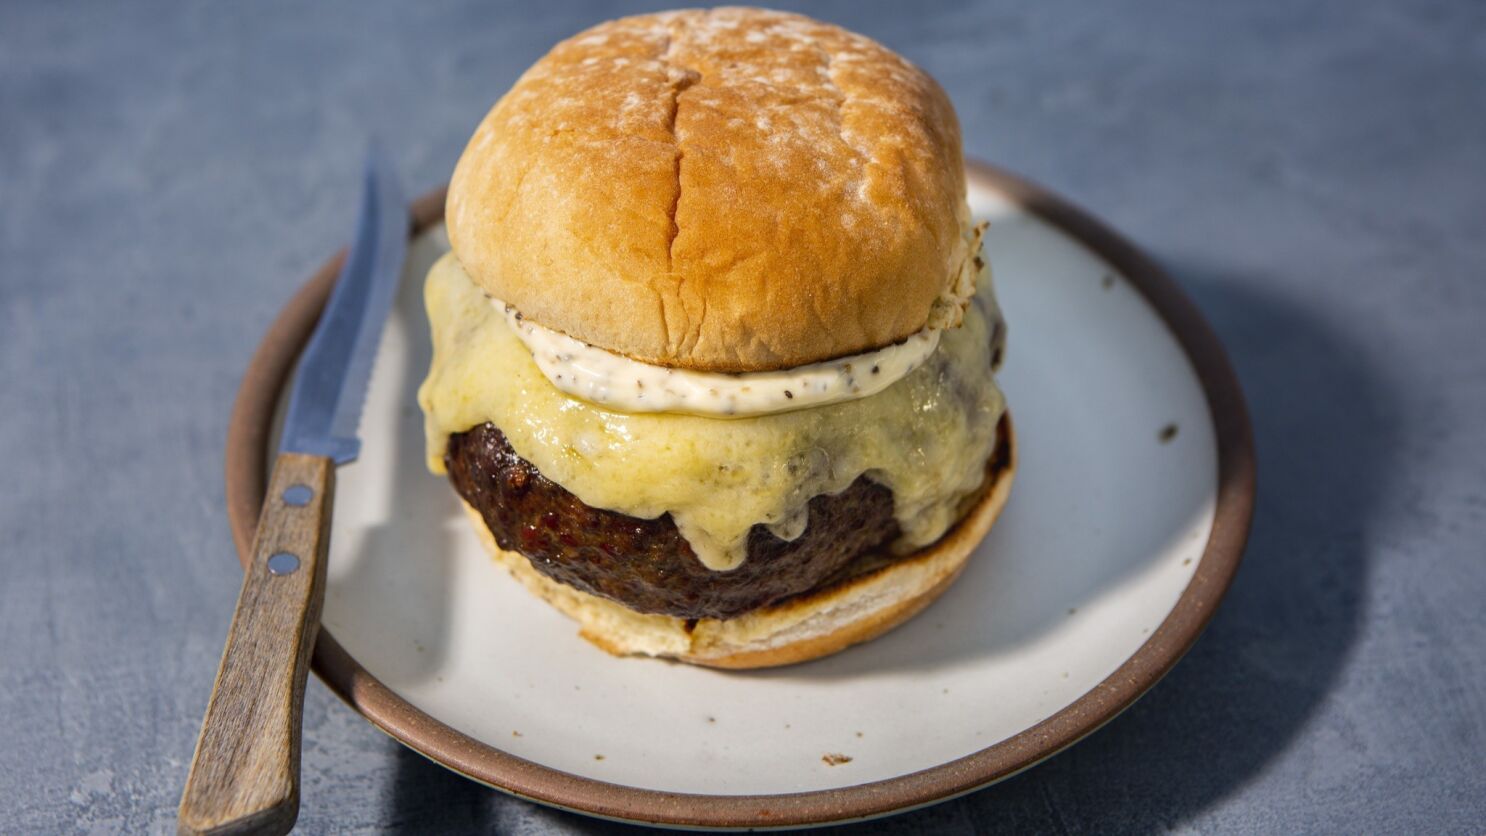 Dry-aged Burger with Gruyère and Homemade Garlic Mayonnaise - The San Diego